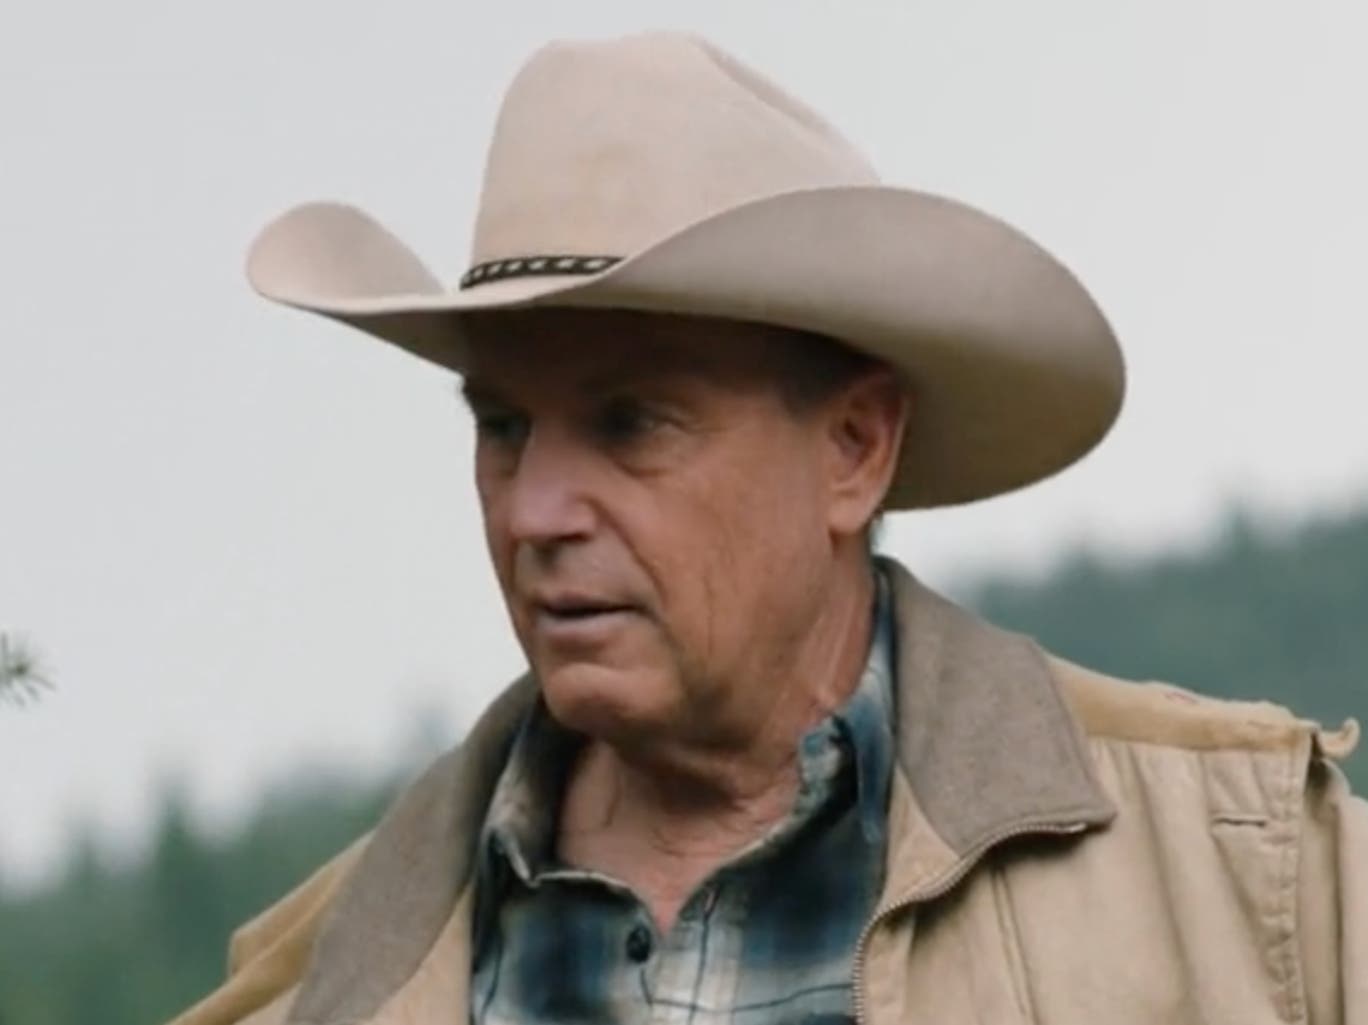  <p>Kevin Costner in “Yellowstone”</p>
<p>“width =” ” /><img loading=